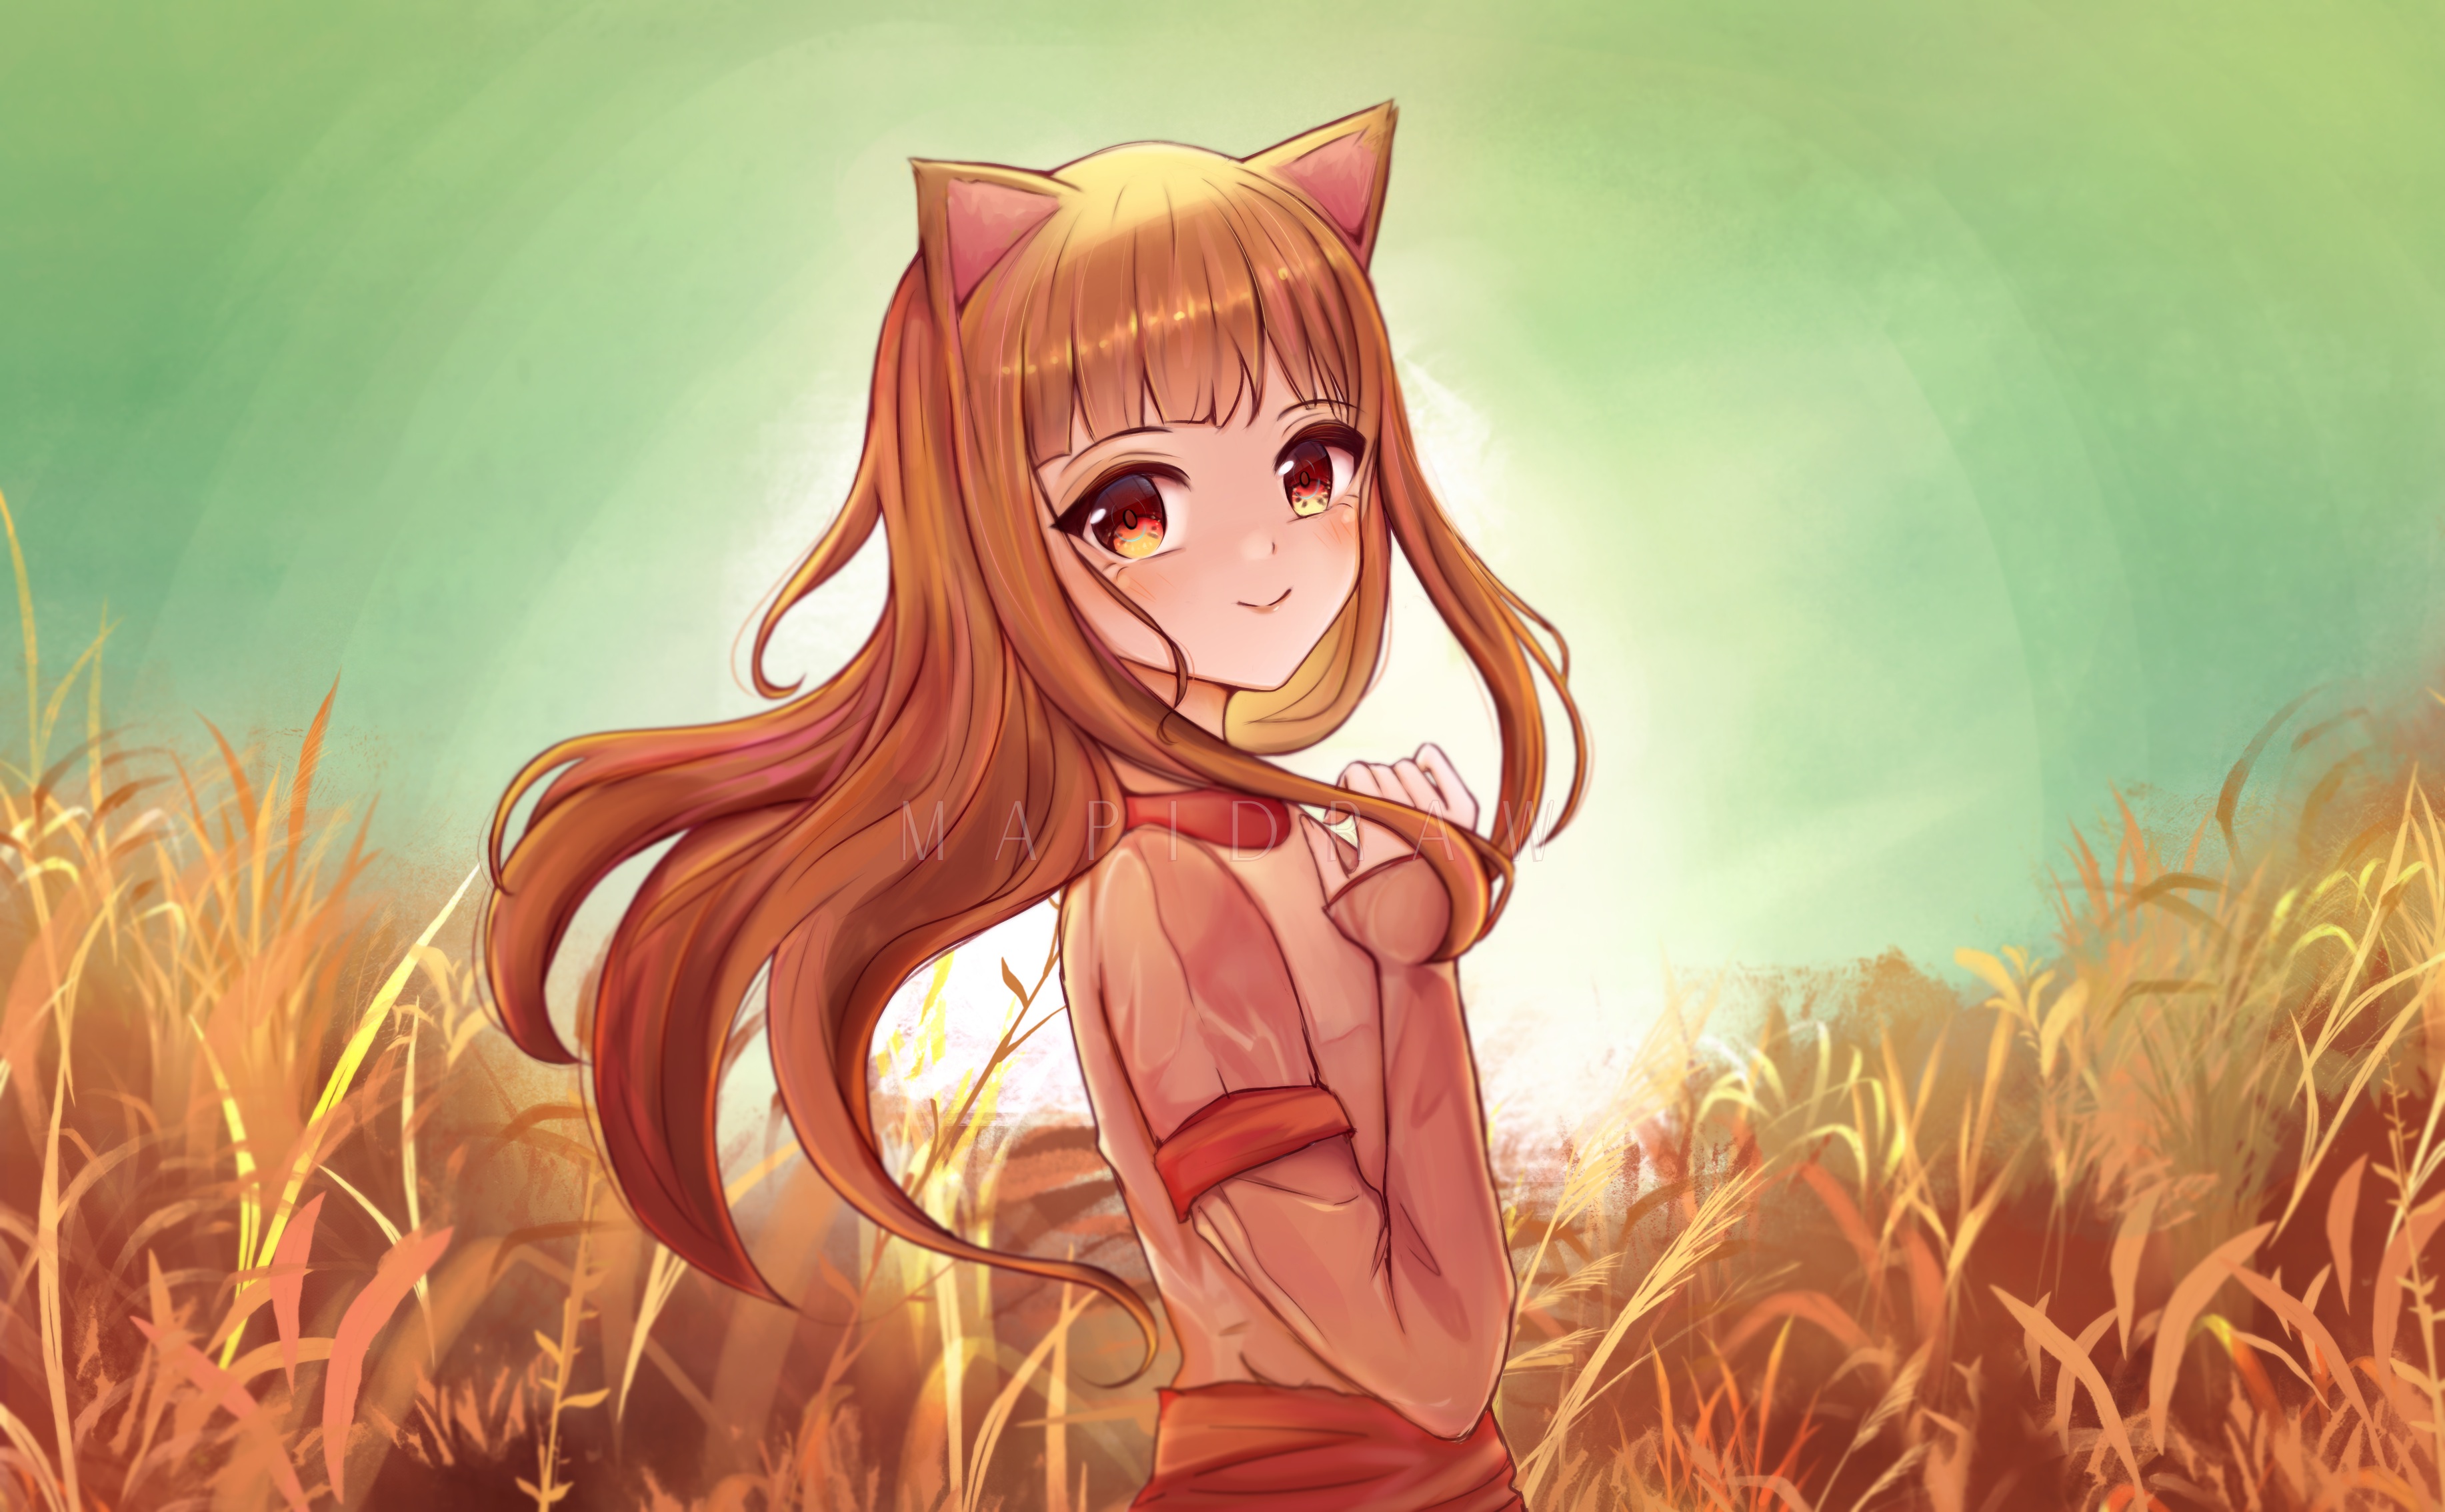 Anime Anime Girls Spice And Wolf Holo Spice And Wolf Wolf Girls 3667x2268